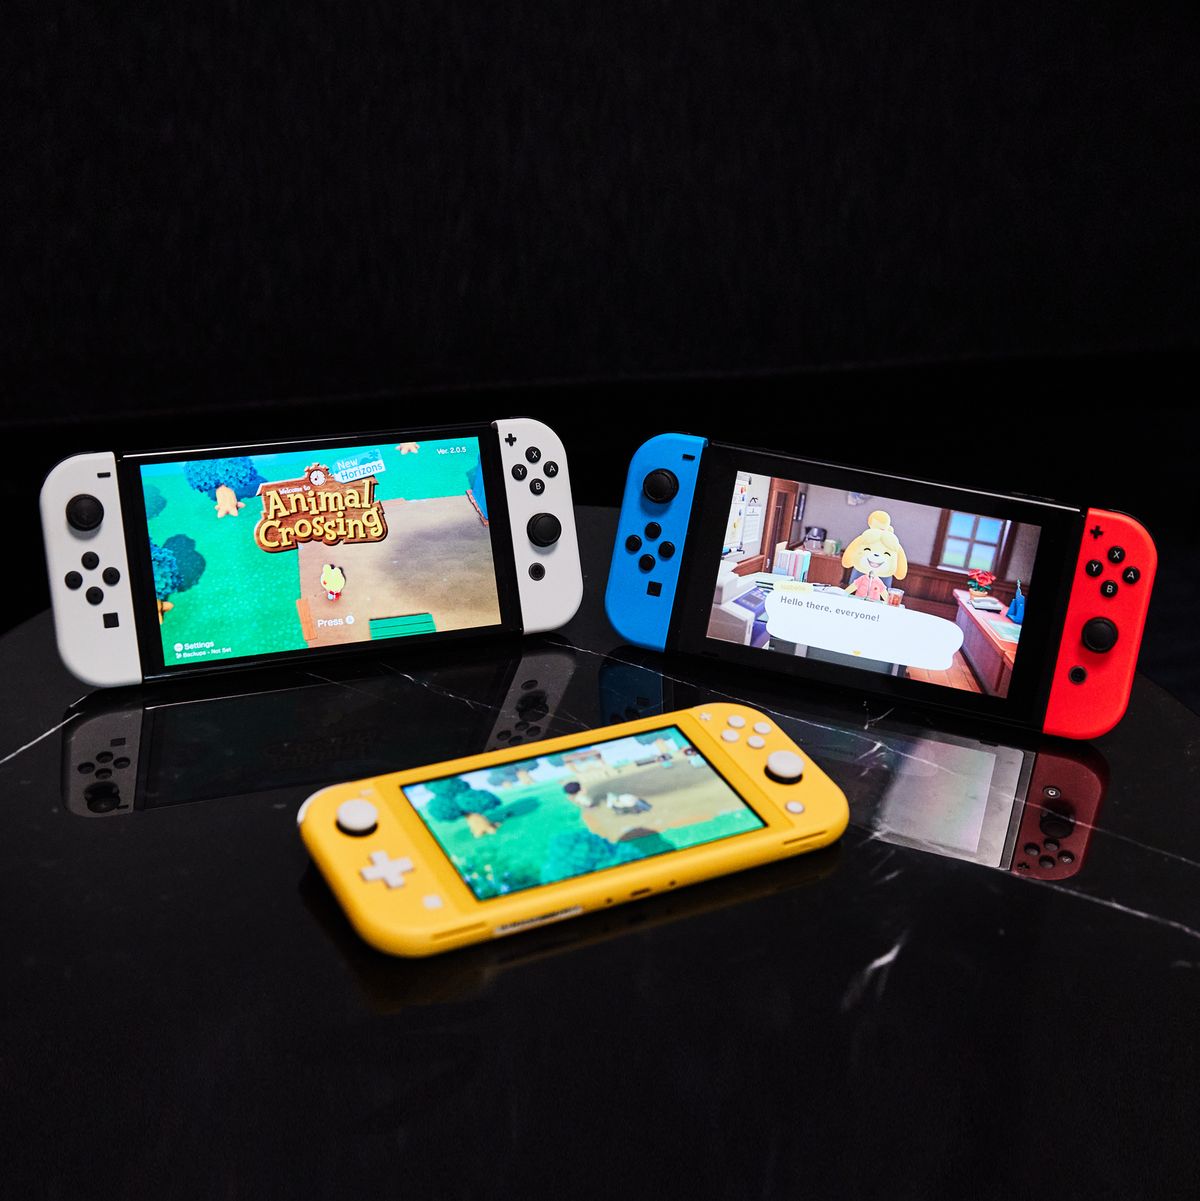 Hardware: Nintendo Switch Lite Review - Half A Switch, But That's More Than  Enough For Some